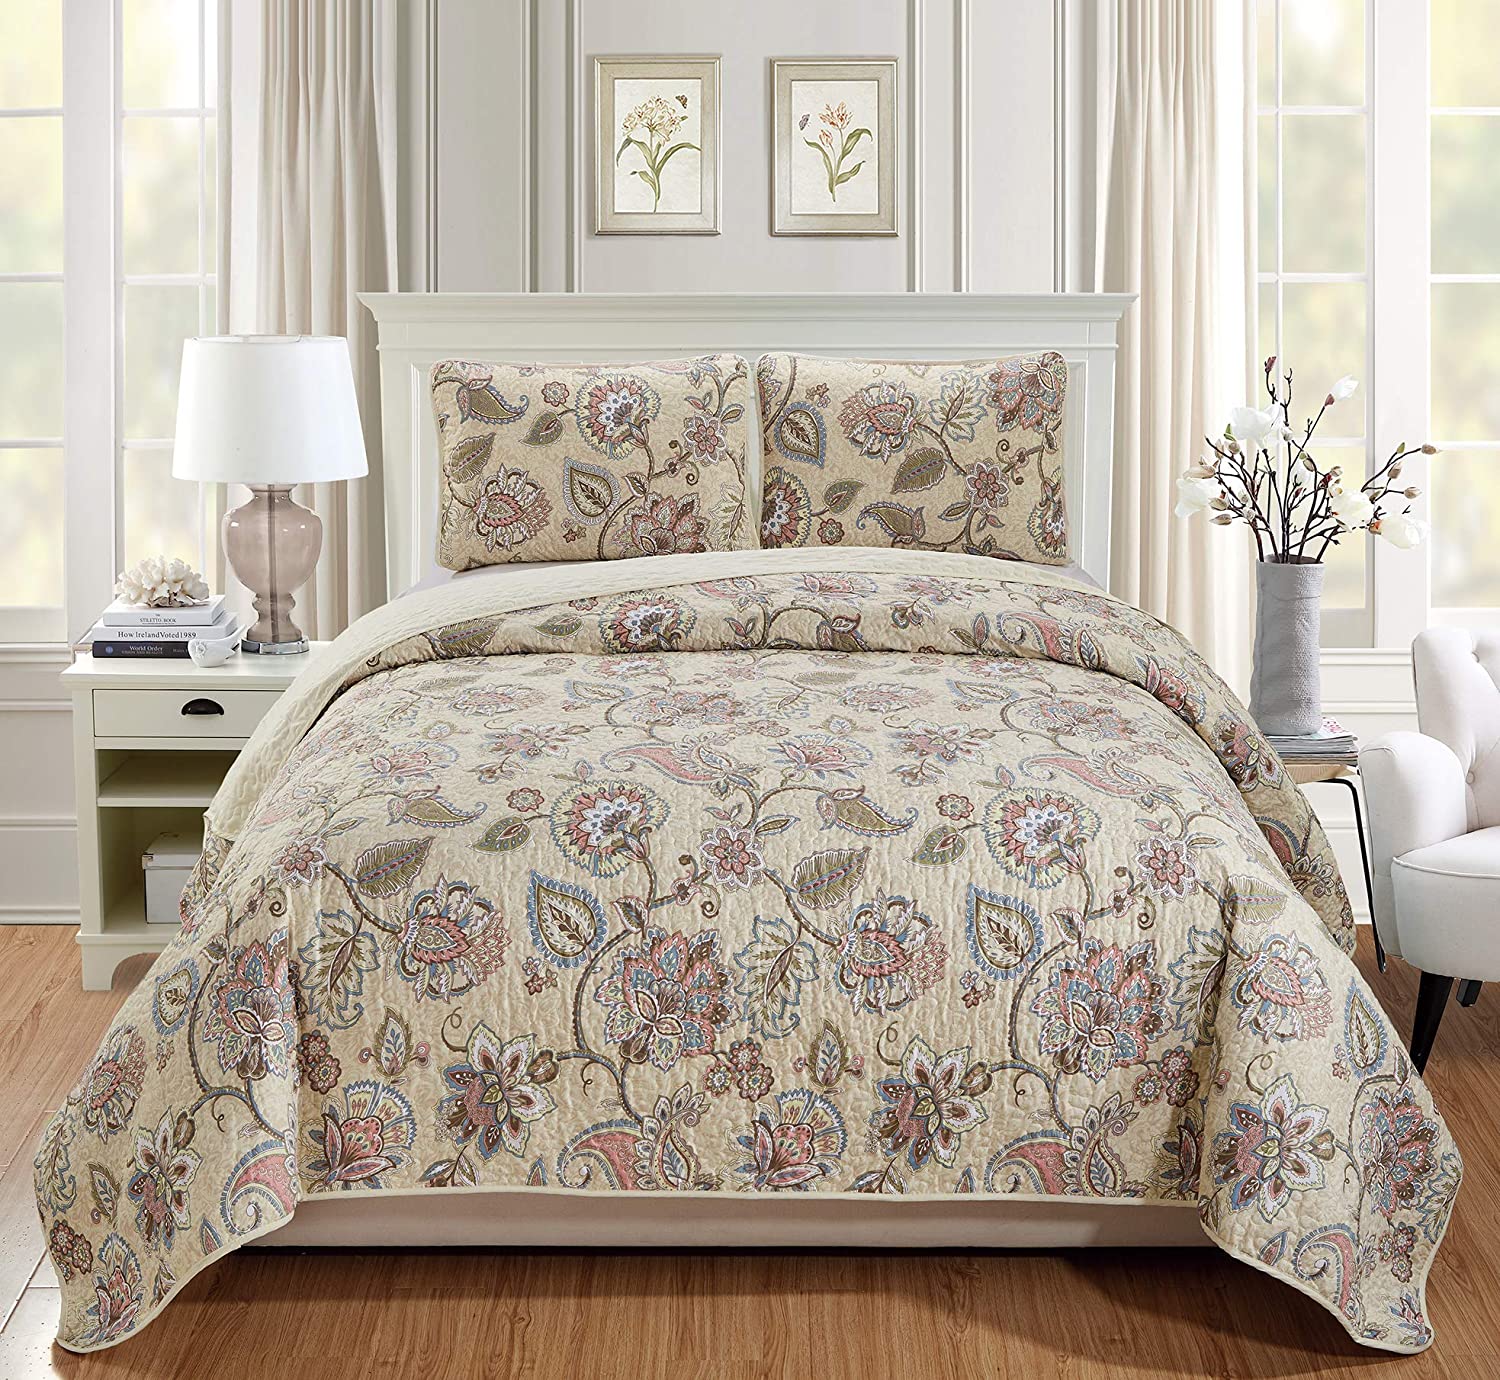 Fancy Linen Over Sized Quilt Bedspread Floral Beige Red Blue Taupe All Sizes New 